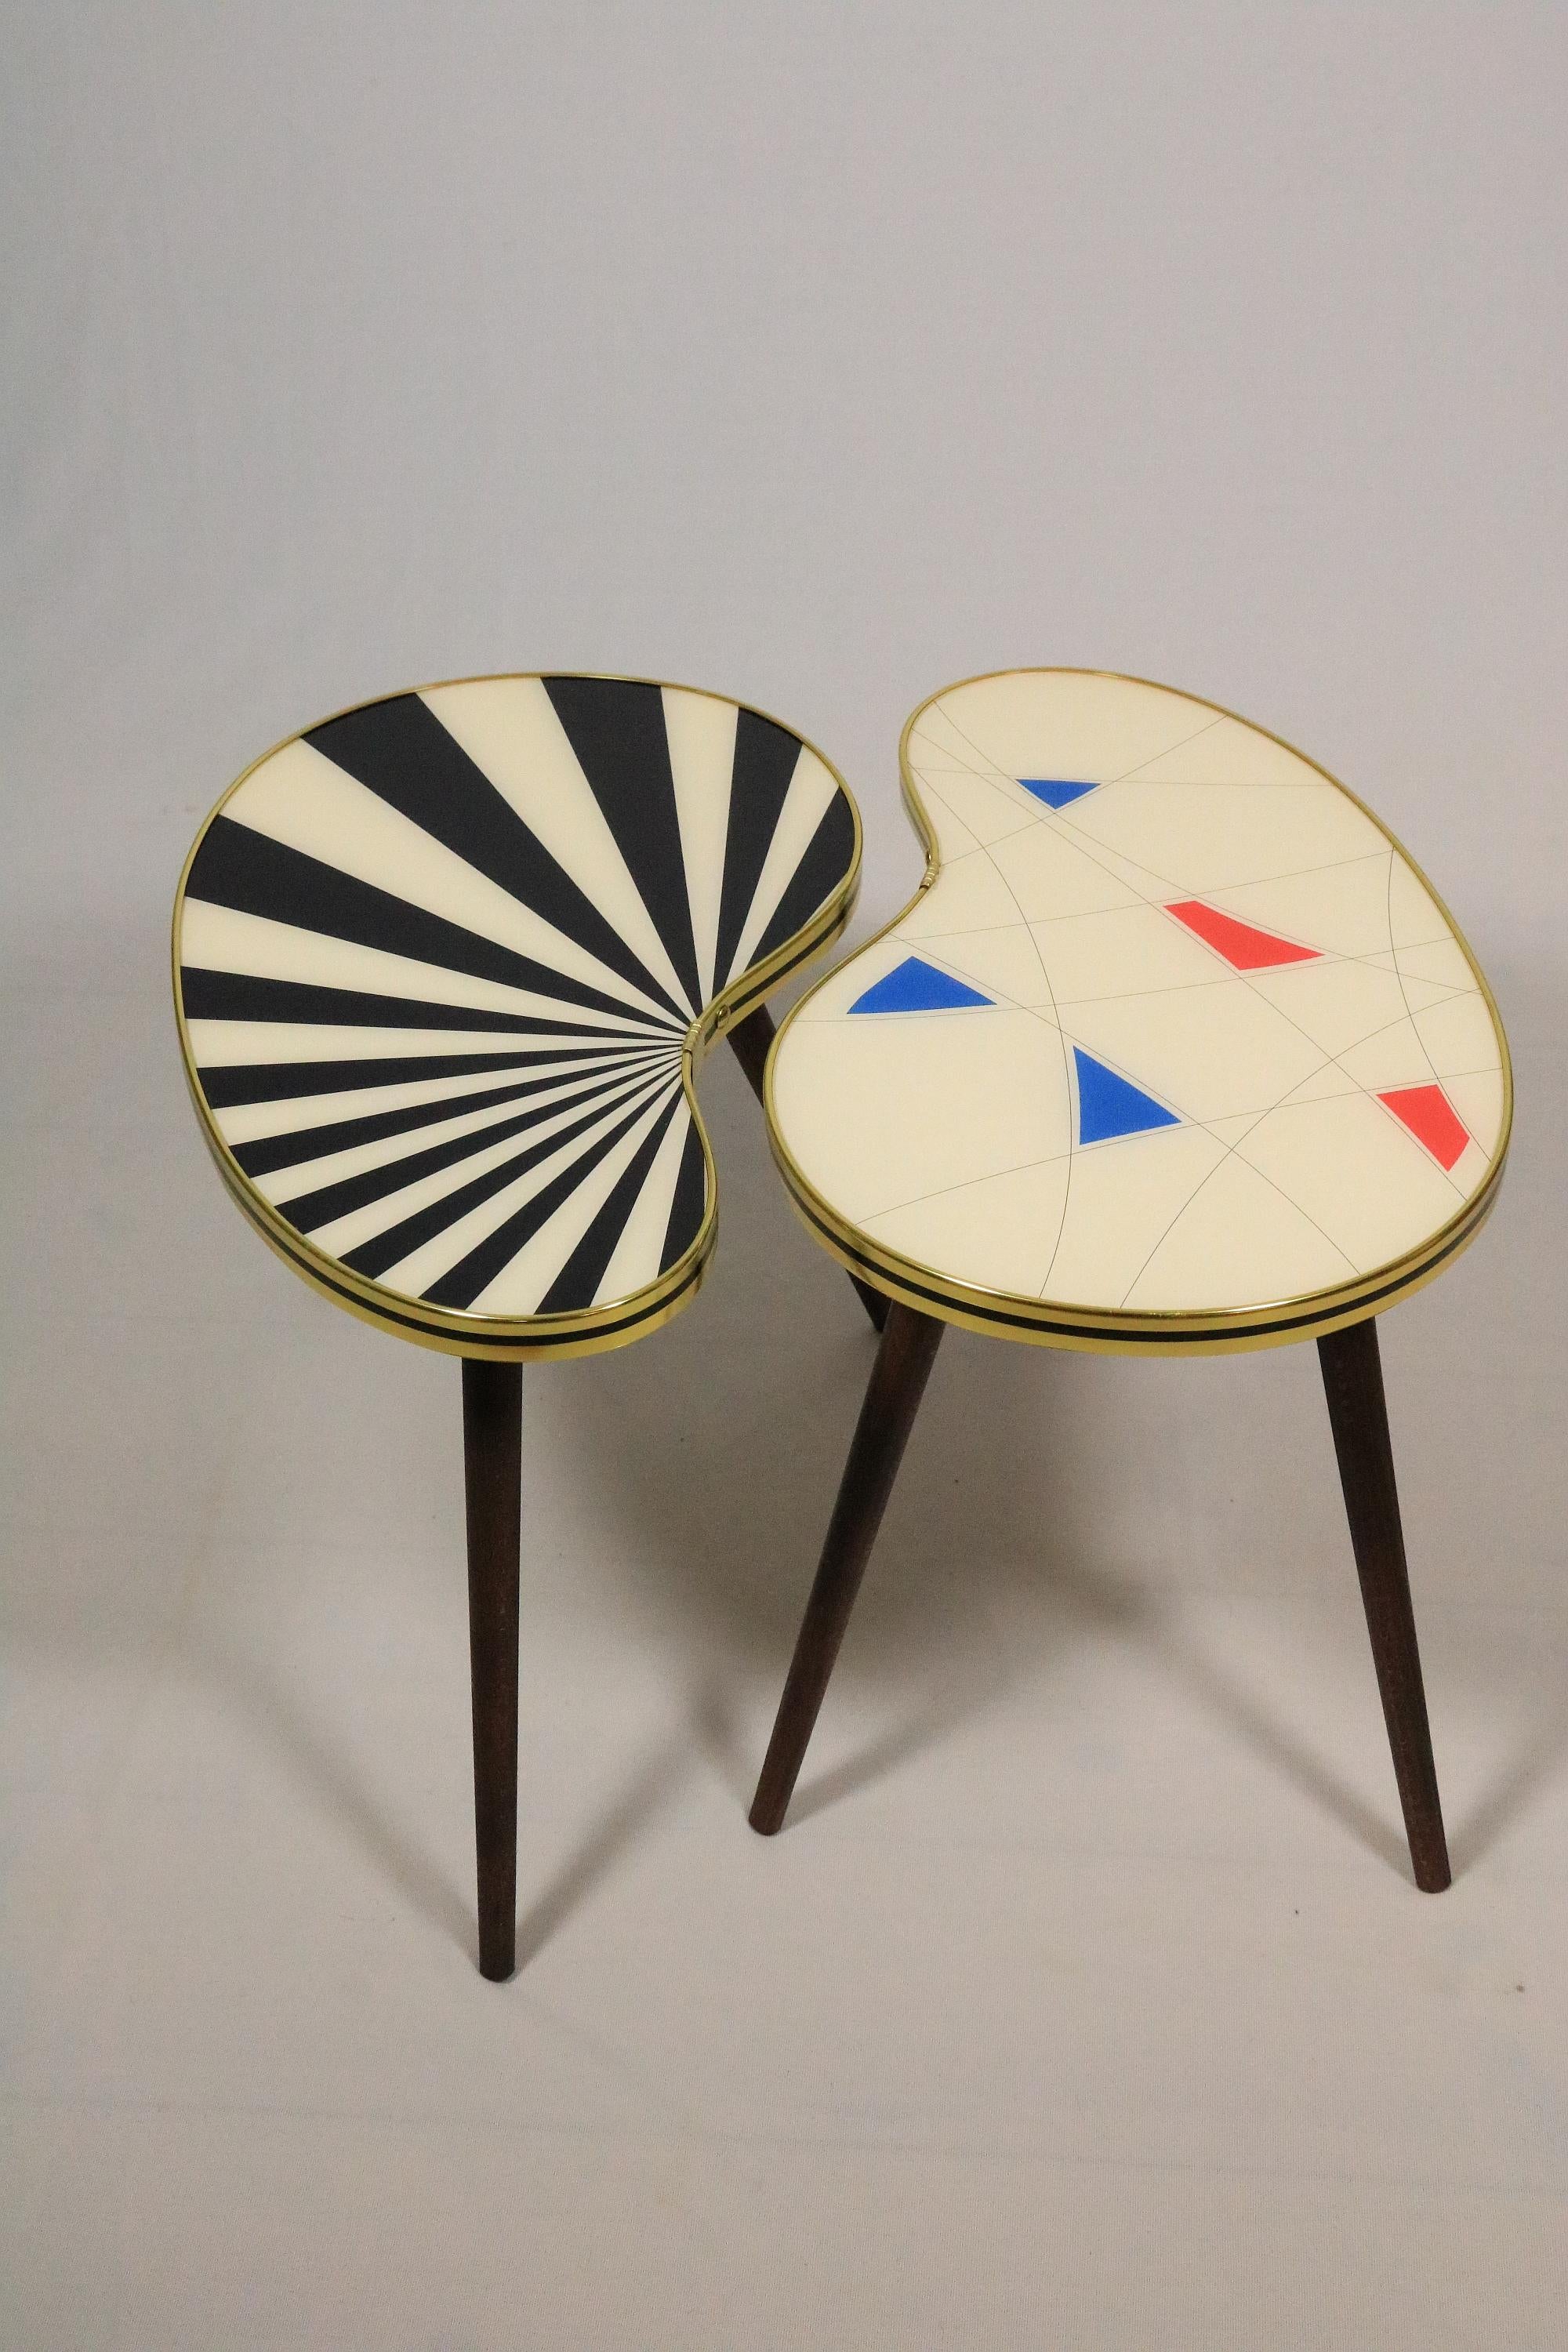 Contemporary Small Side Table, Kidney Shaped, Black-White Stripes, 3 Elegant Legs, 50s Style For Sale